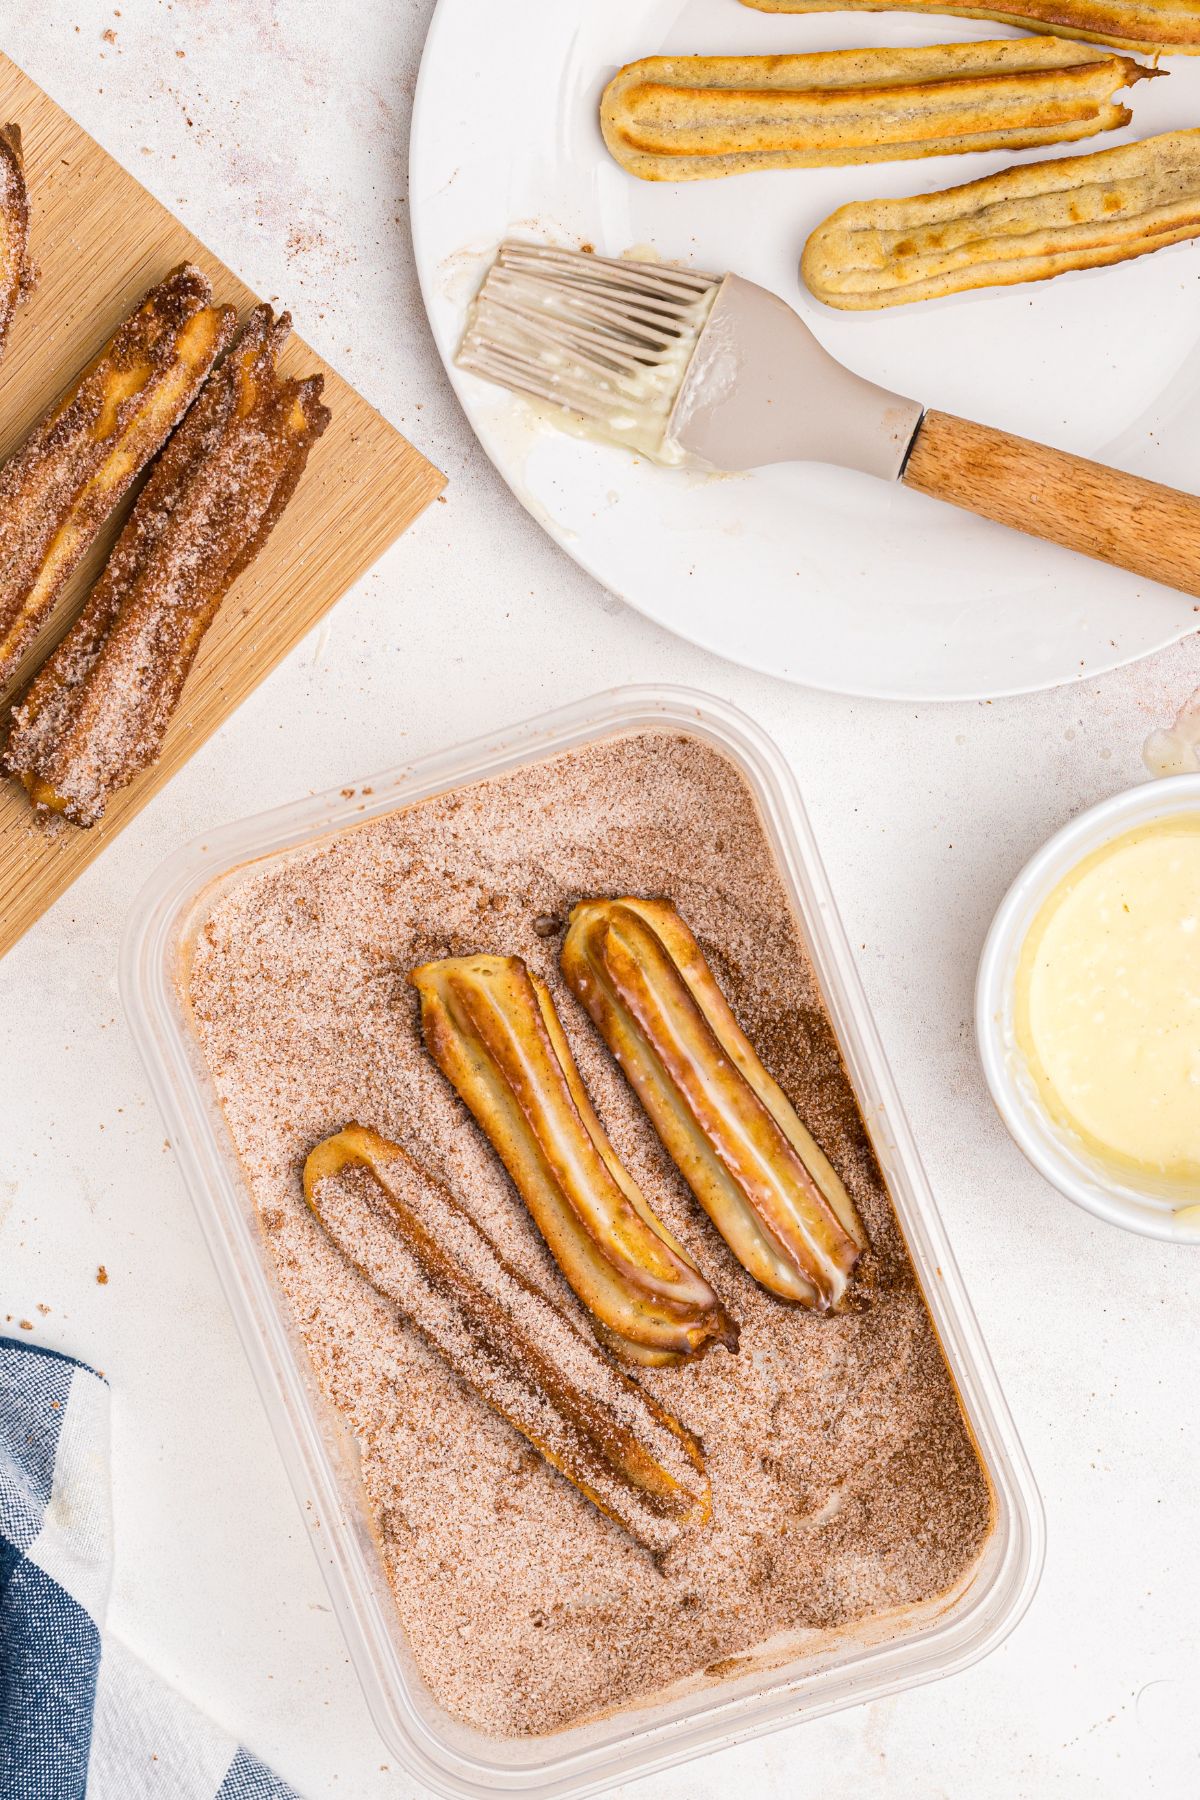 Churros brushed with melted butter and rolled in sugar and cinnamon